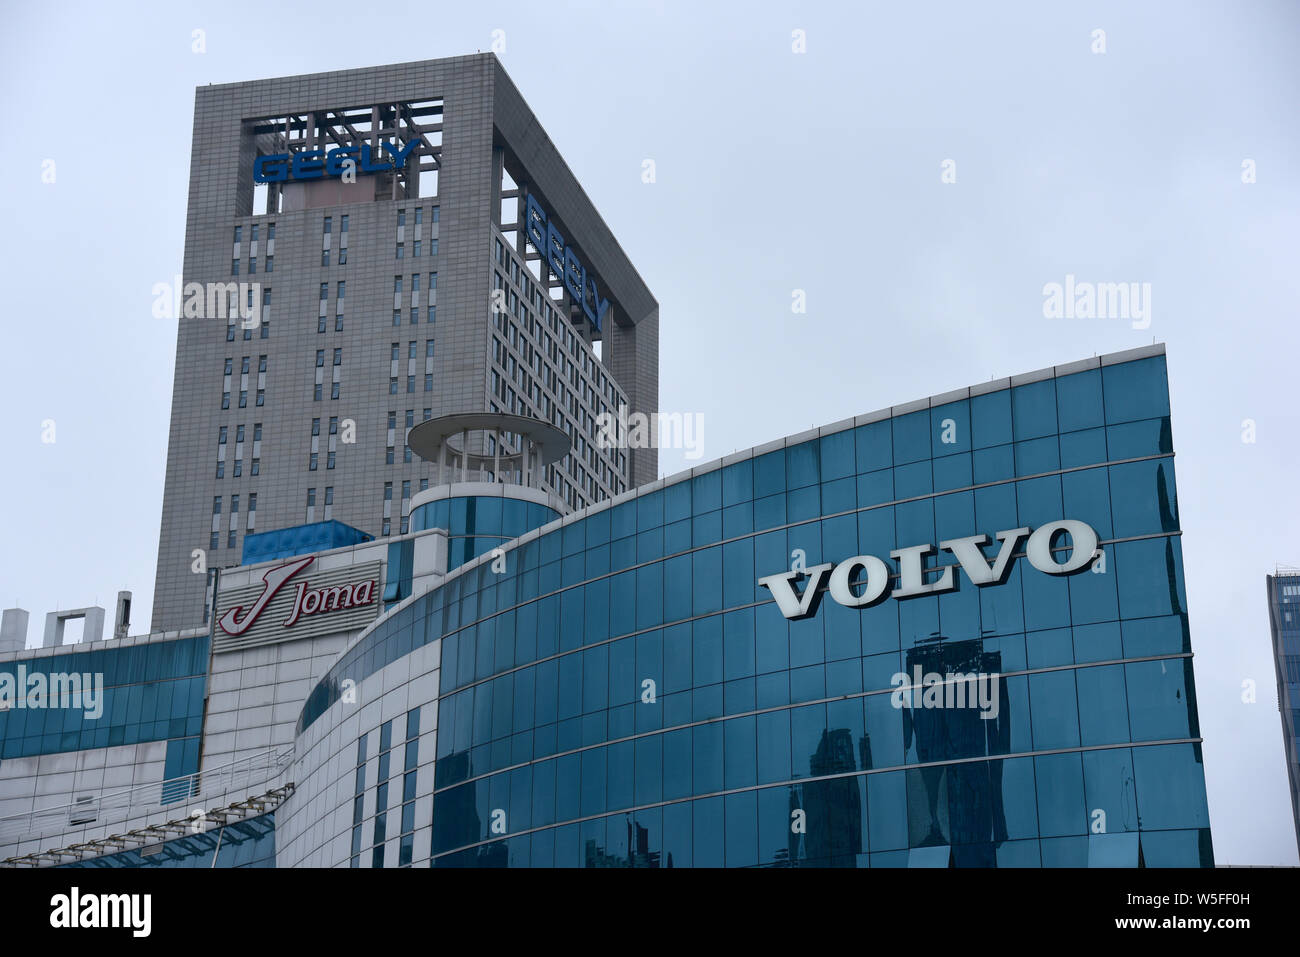 --FILE--A signboard of Volvo is seen at the headquarters of Geely in Hangzhou city, east China's Zhejiang province, 8 February 2019.   With green grow Stock Photo